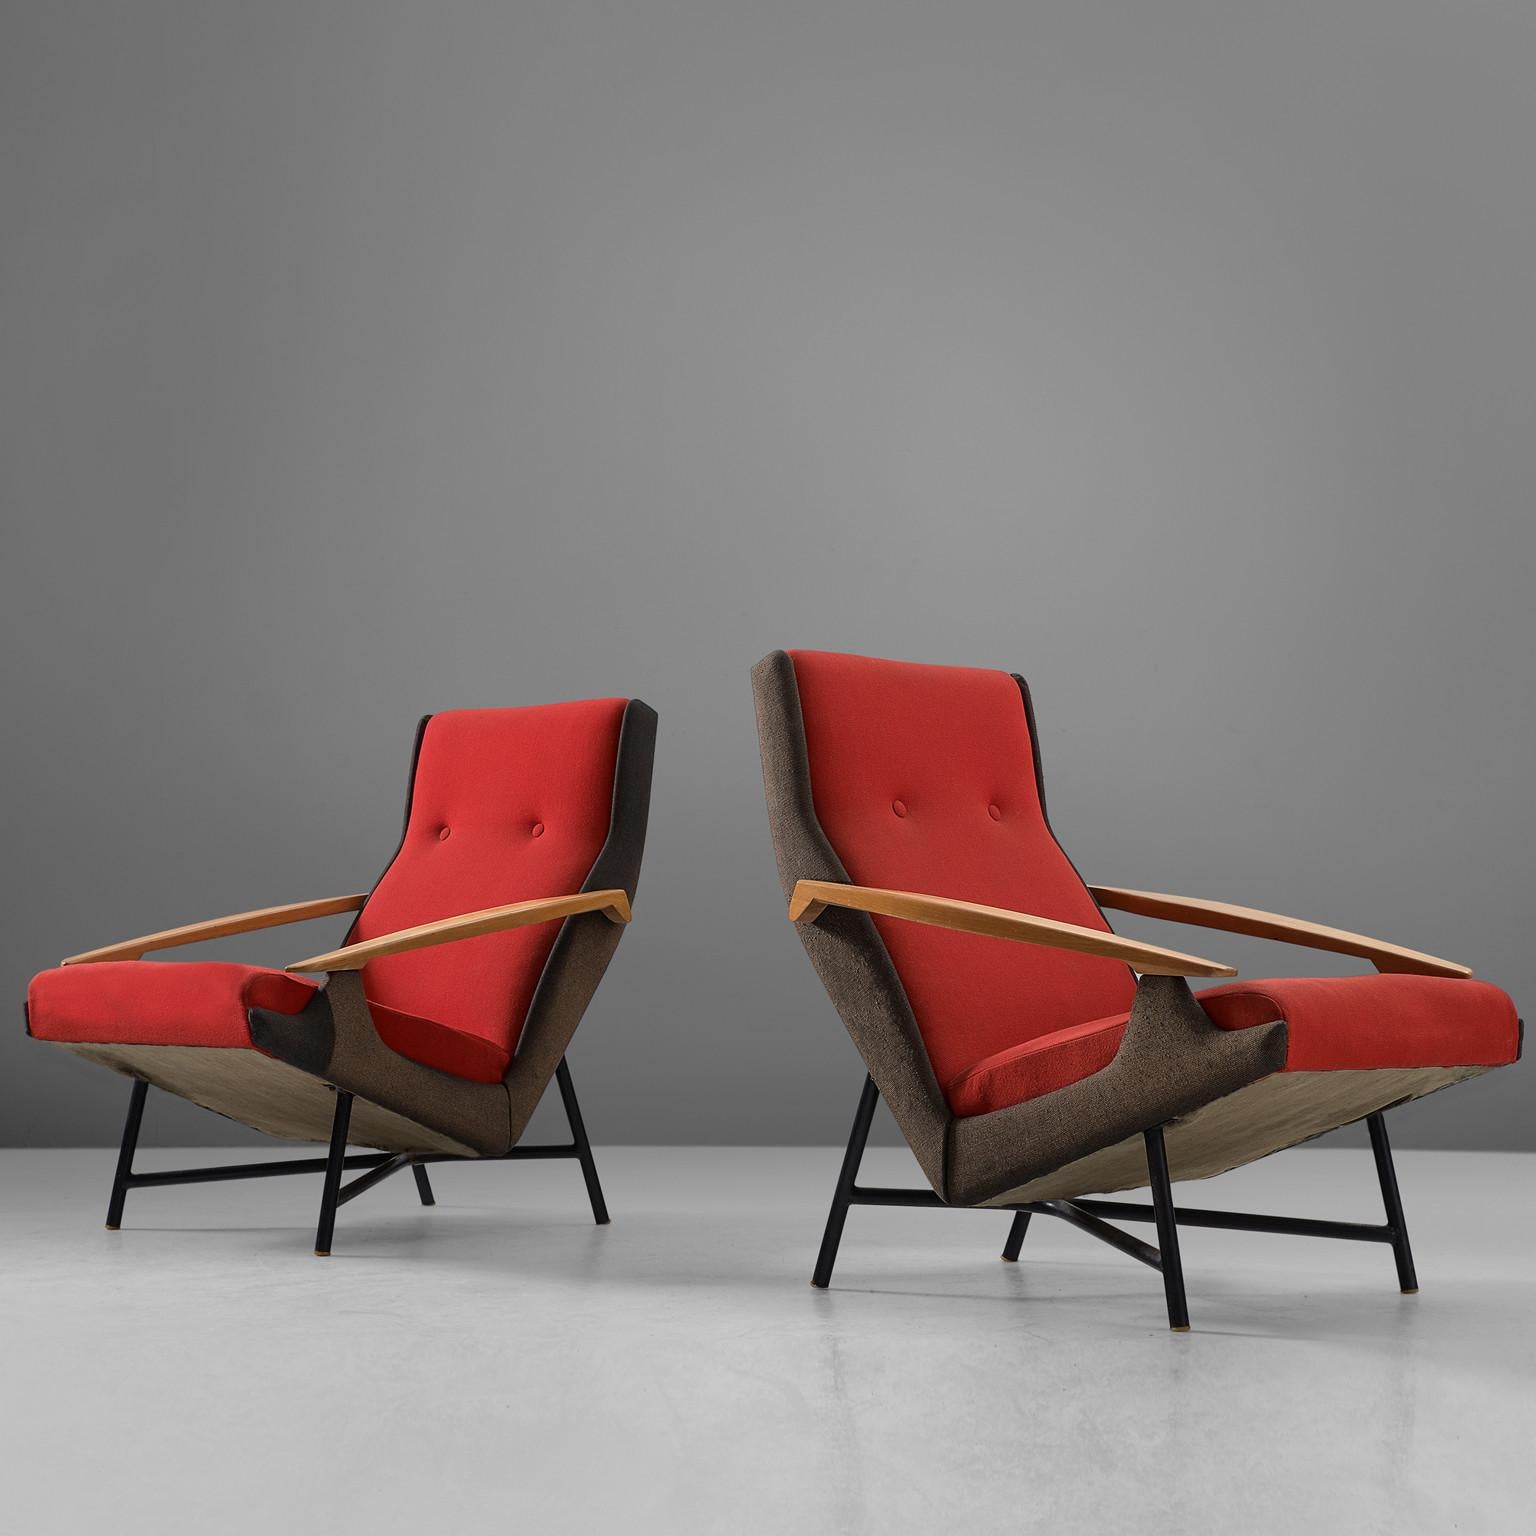 Set of two lounge chairs, in beech, metal and fabric, by Claude Vassal, France, 1950s. 

A pair of modern armchairs in black and red upholstery. These chairs show an interesting combination of materials and get therefore their unique appearance. The